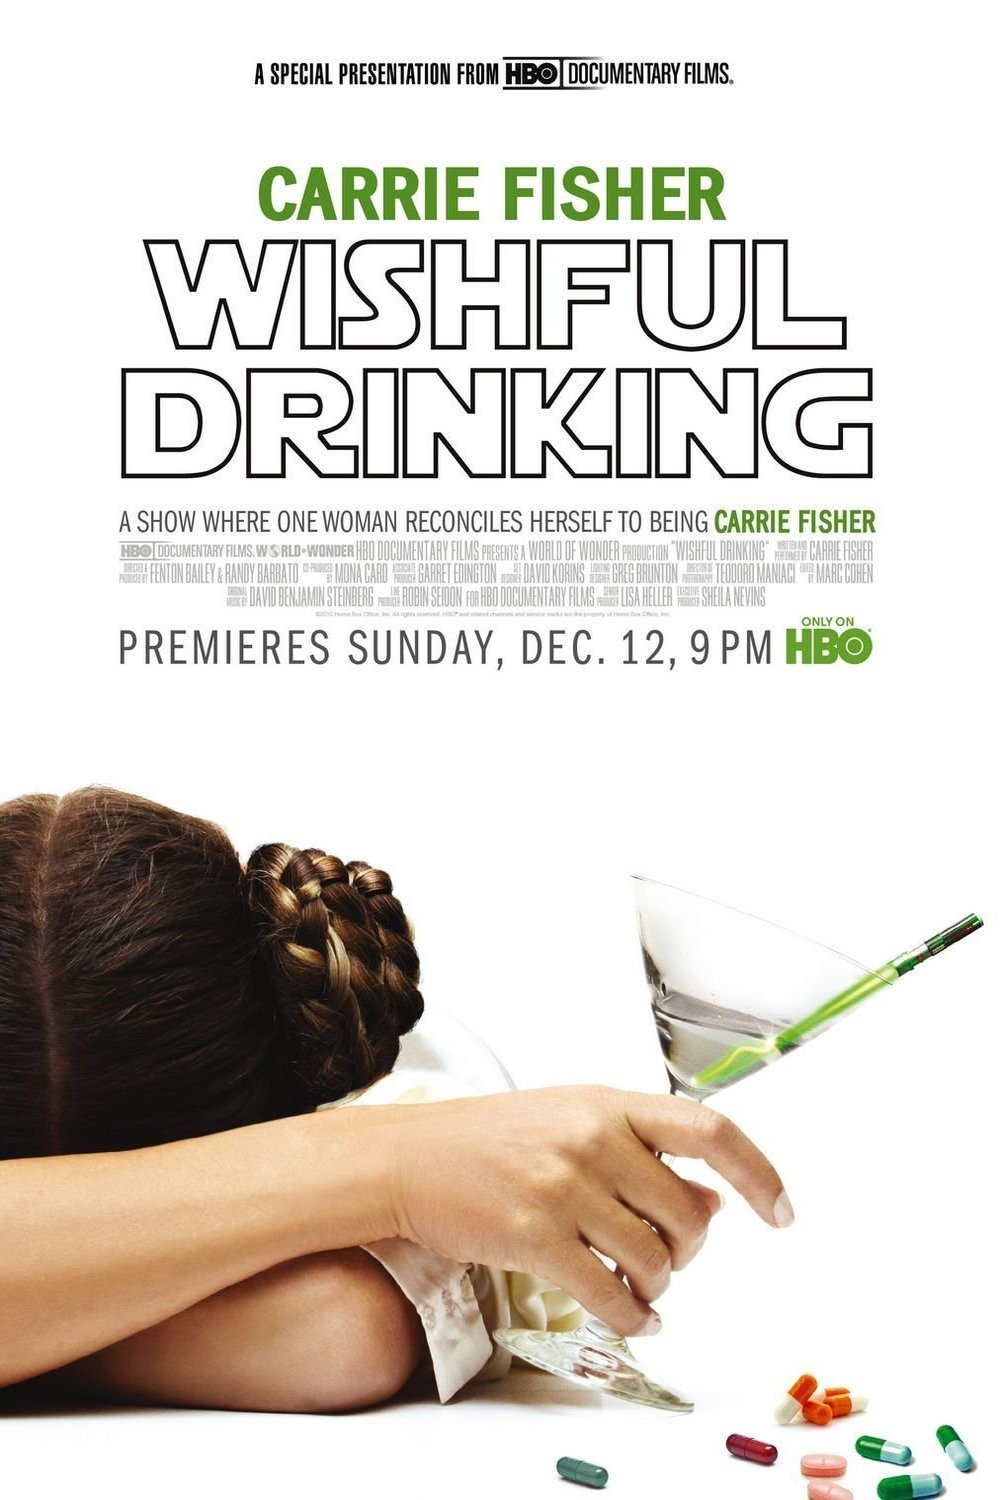 Poster of the movie Carrie Fisher: Wishful Drinking